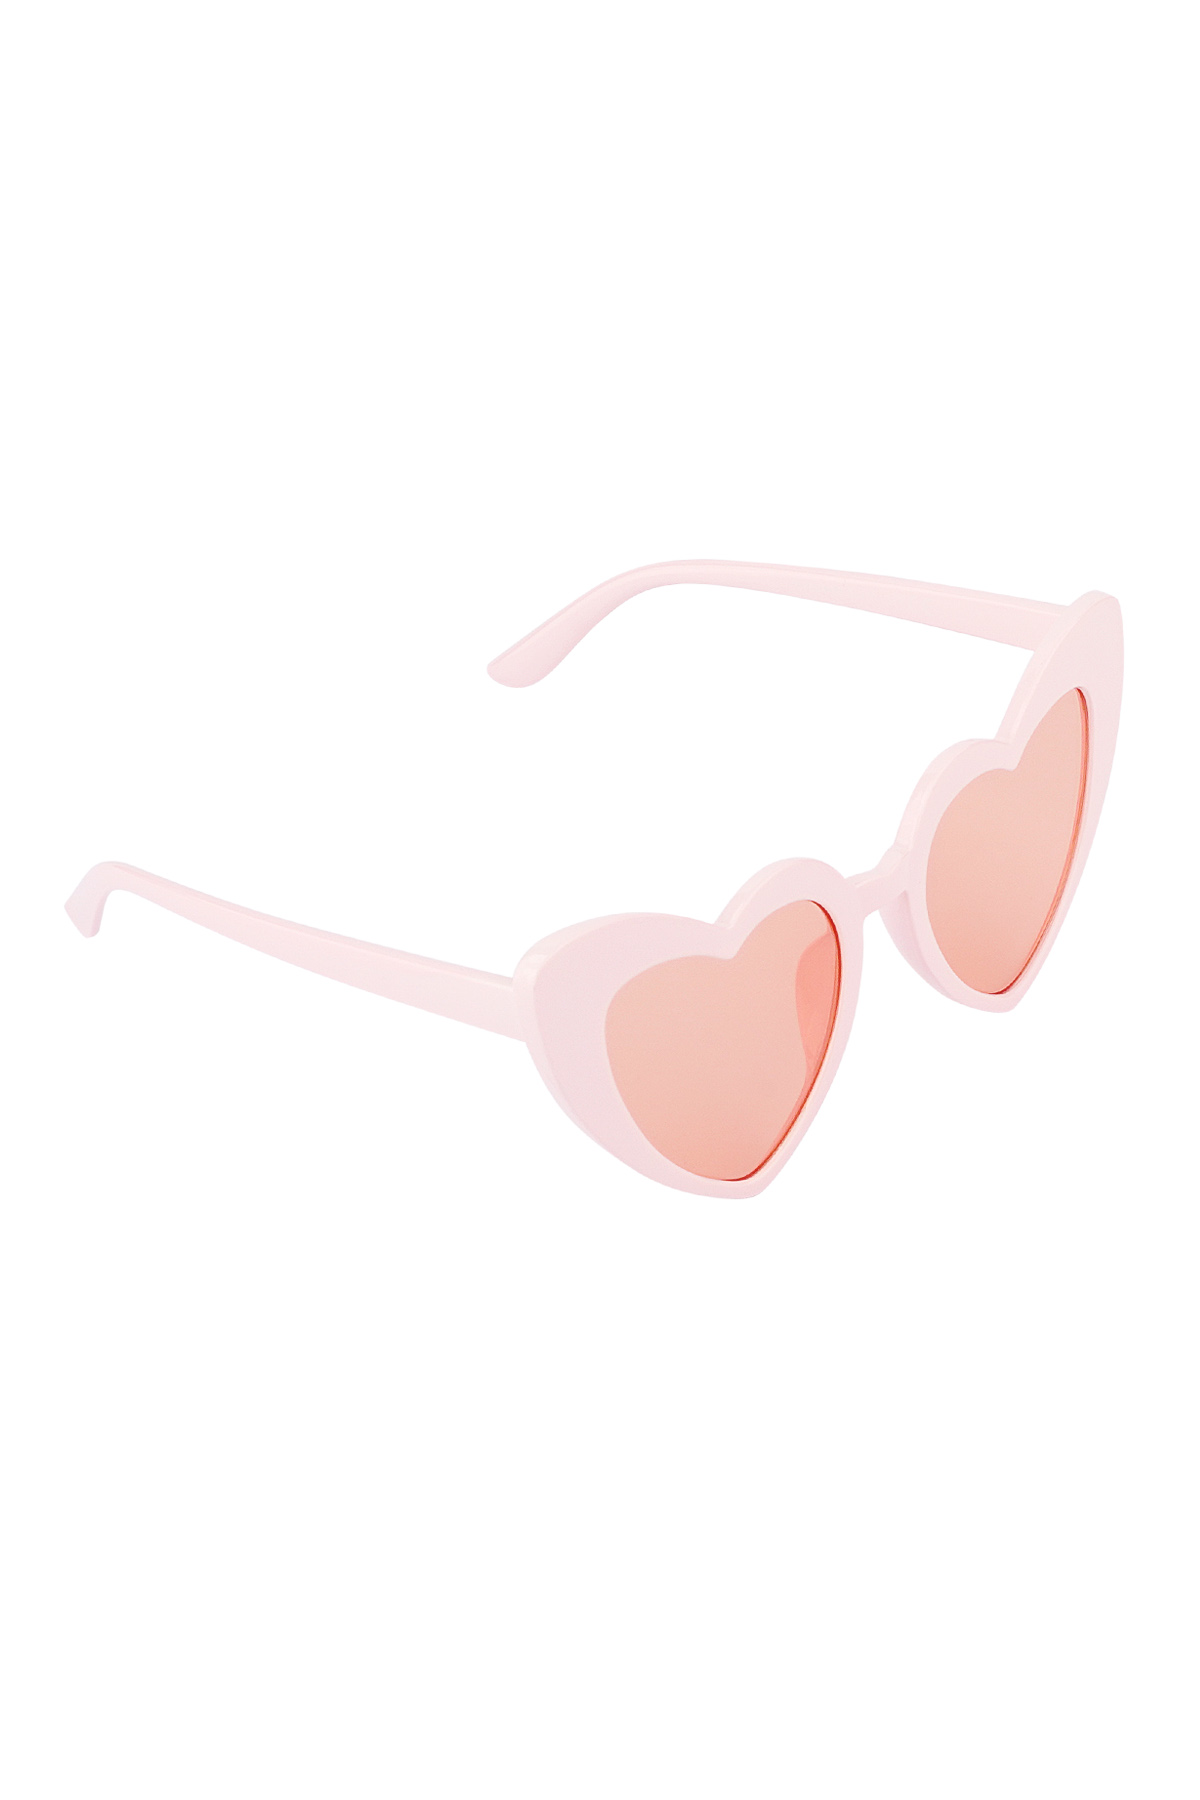 Sunglasses love is in the air - pink